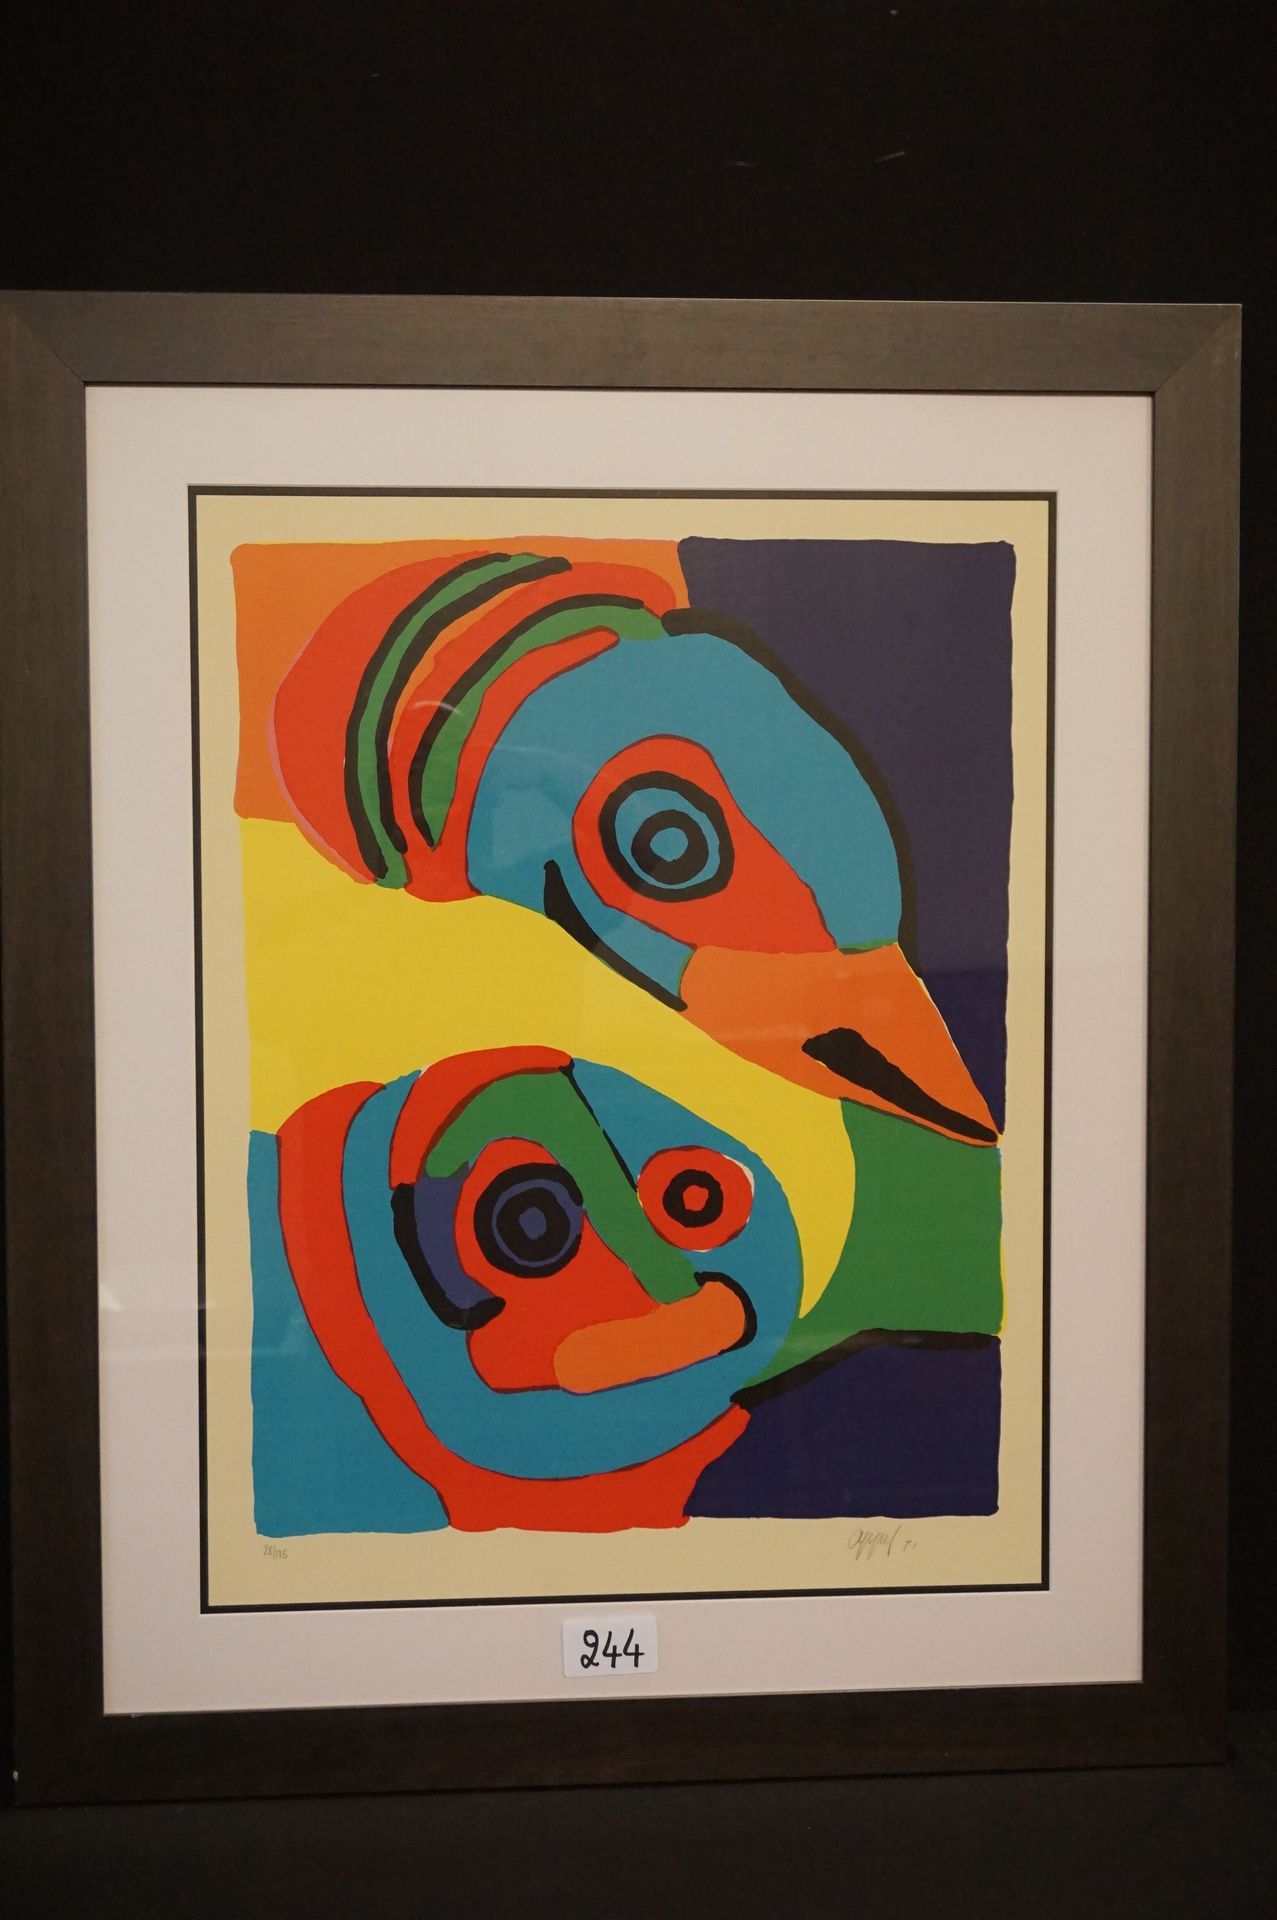 KAREL APPEL (1921 - 2006) "Composition Cobra" - Lithograph - Signed and dated 19&hellip;